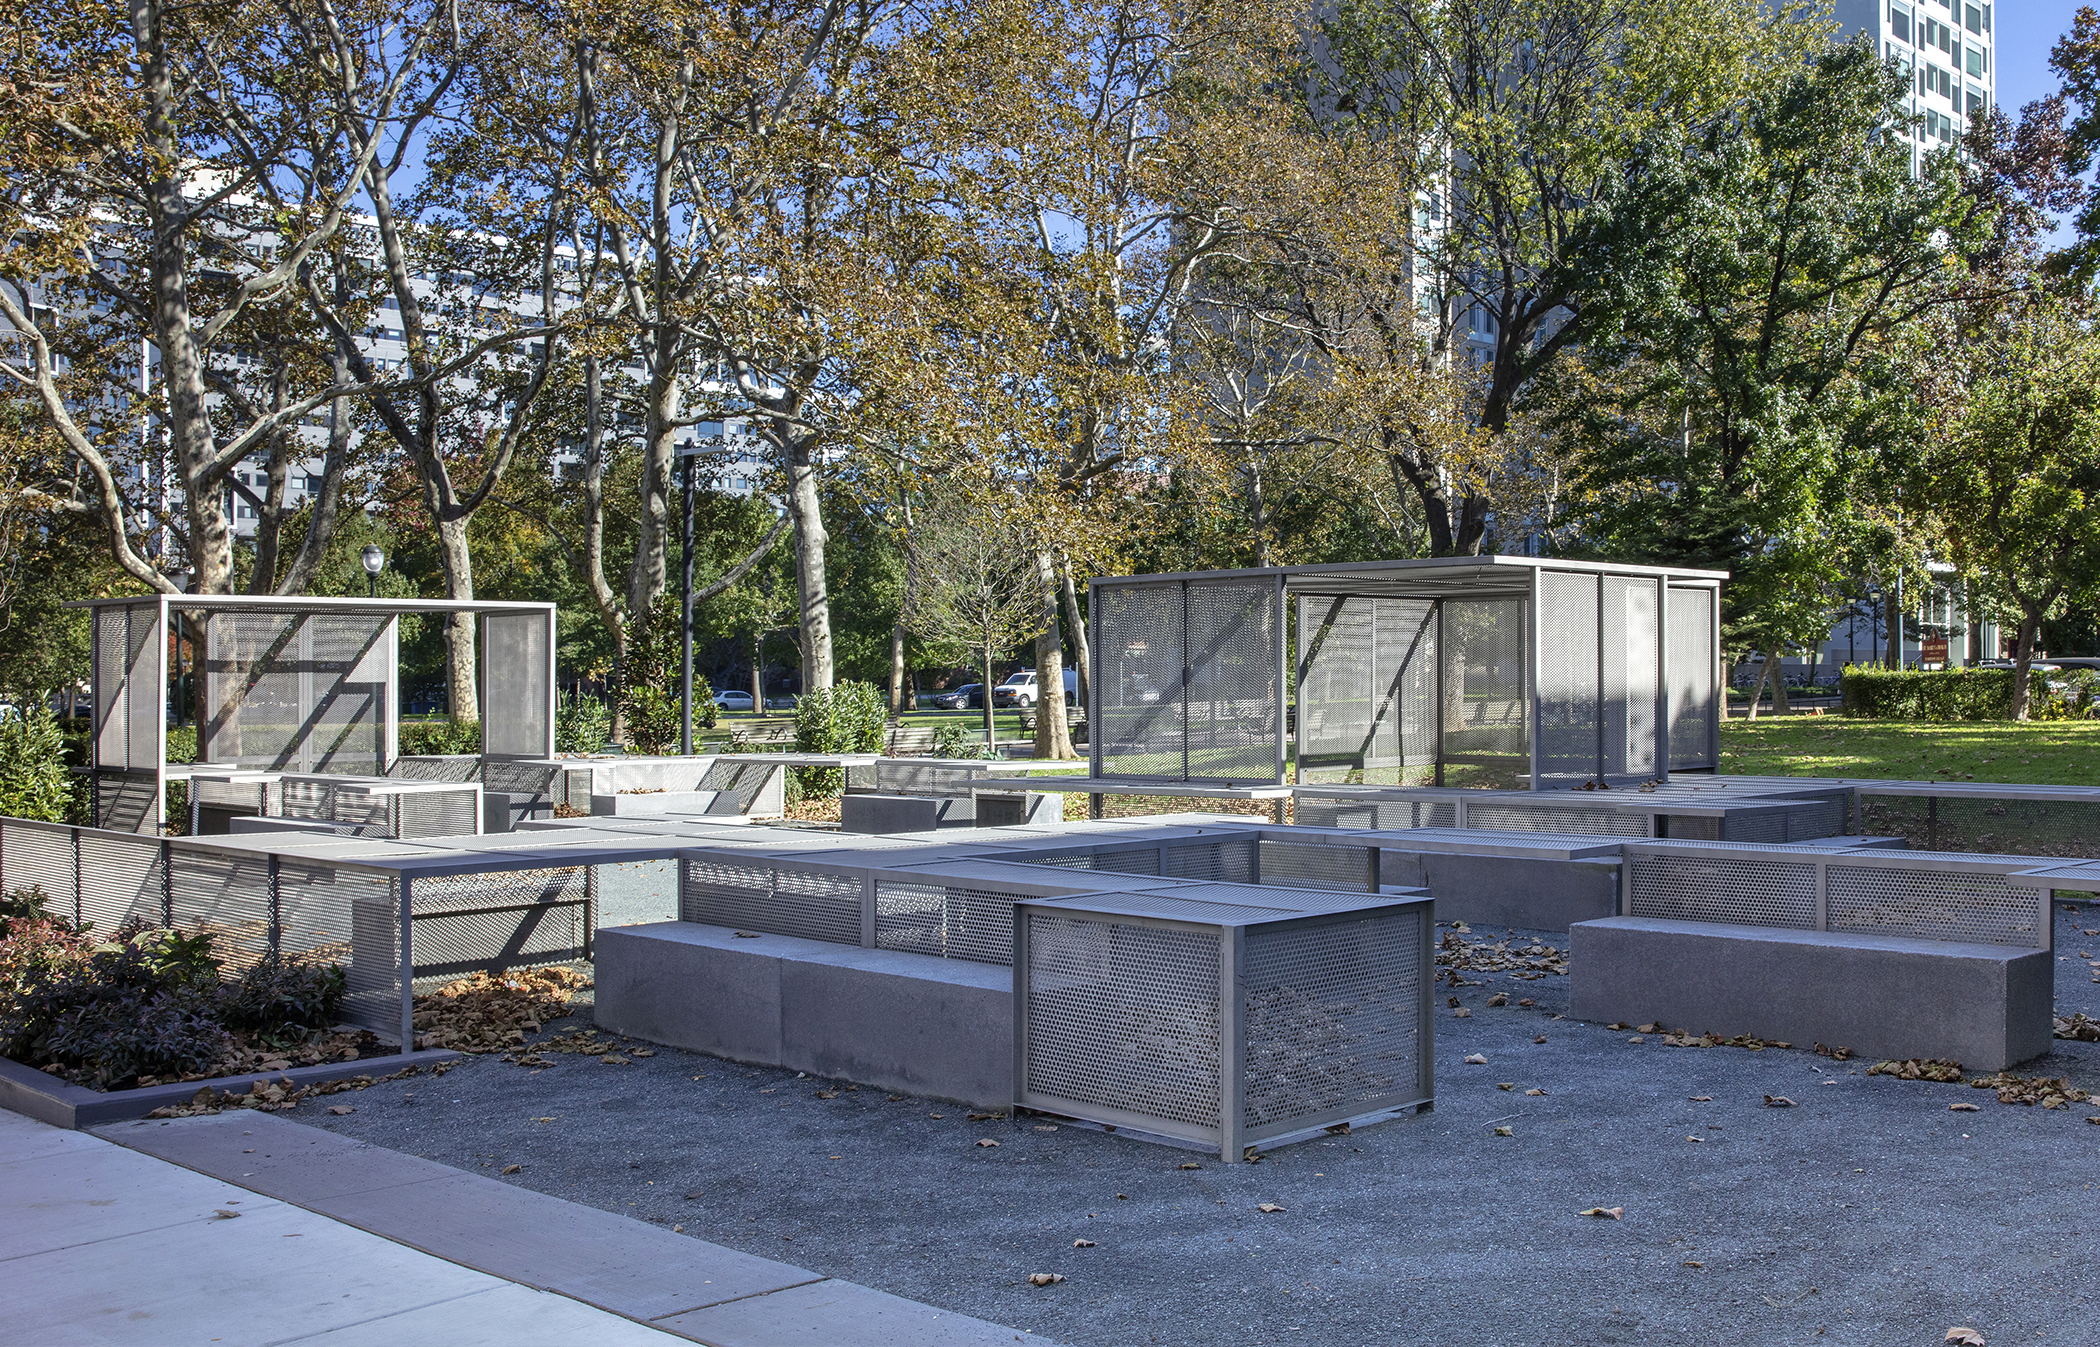 A series of puzzle-like perforated gray steel pavilions, tables and benches